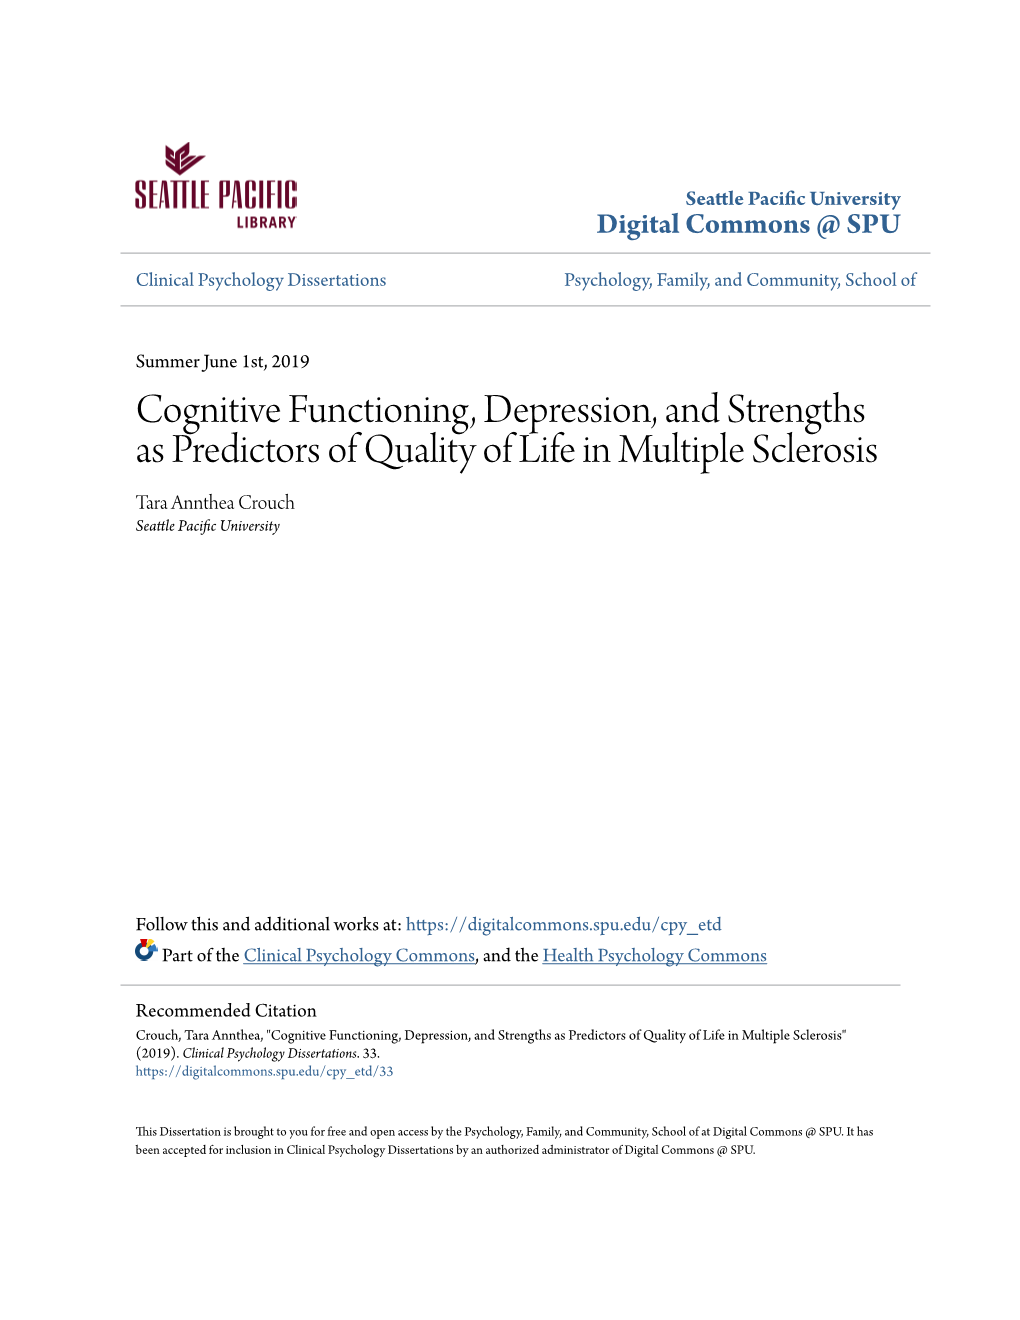 Cognitive Functioning, Depression, and Strengths As Predictors of Quality of Life in Multiple Sclerosis Tara Annthea Crouch Seattle Pacific Nu Iversity